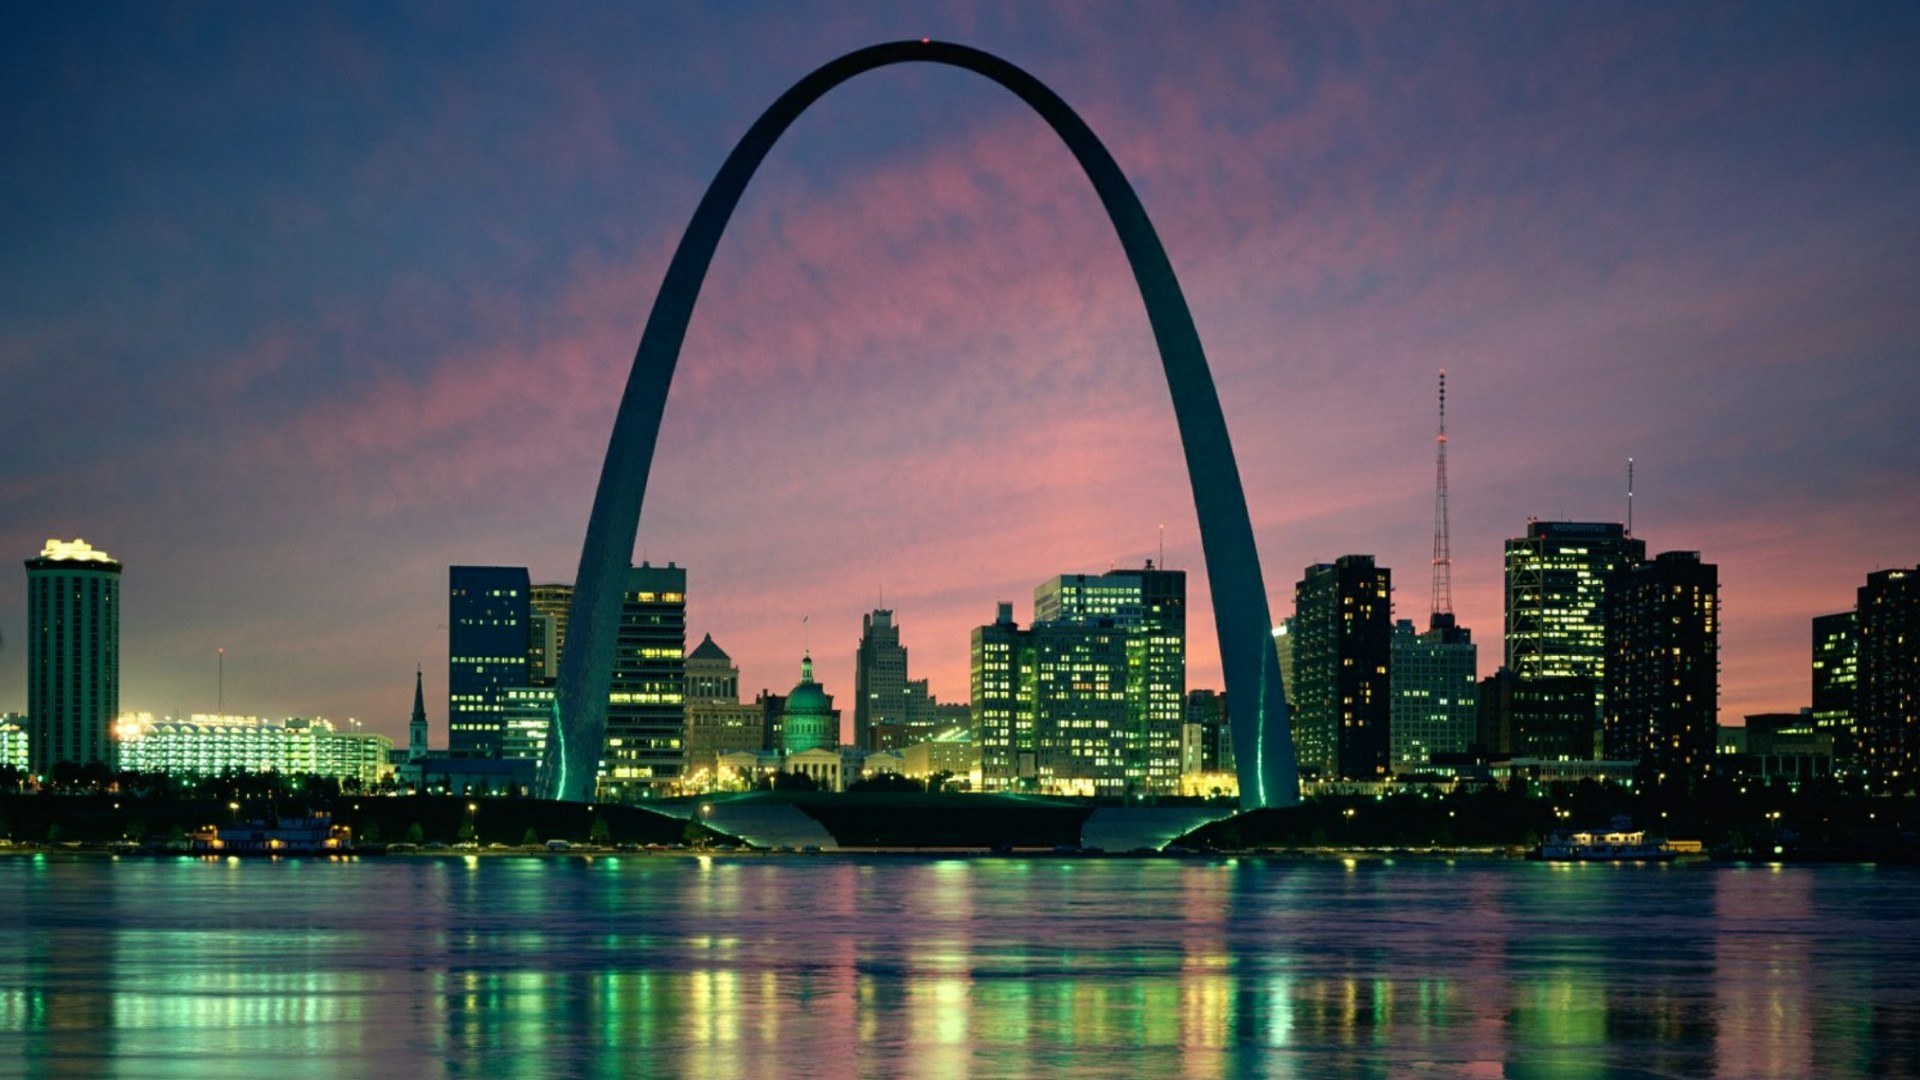 Gateway Arch at night wallpaper - backiee